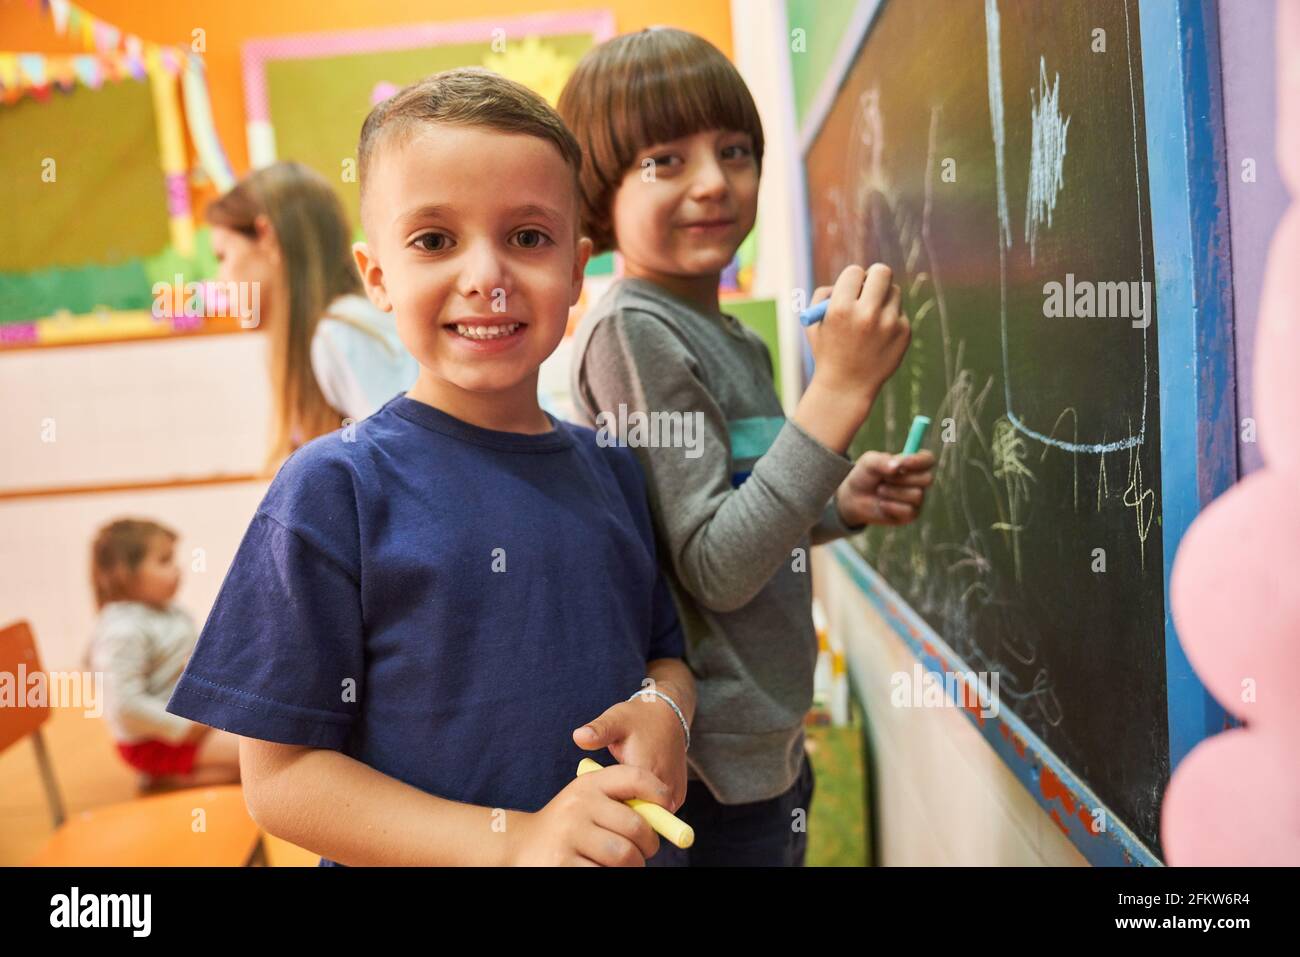 Children paint with chalk on the blackboard in preschool or elementary school in creative painting class Stock Photo